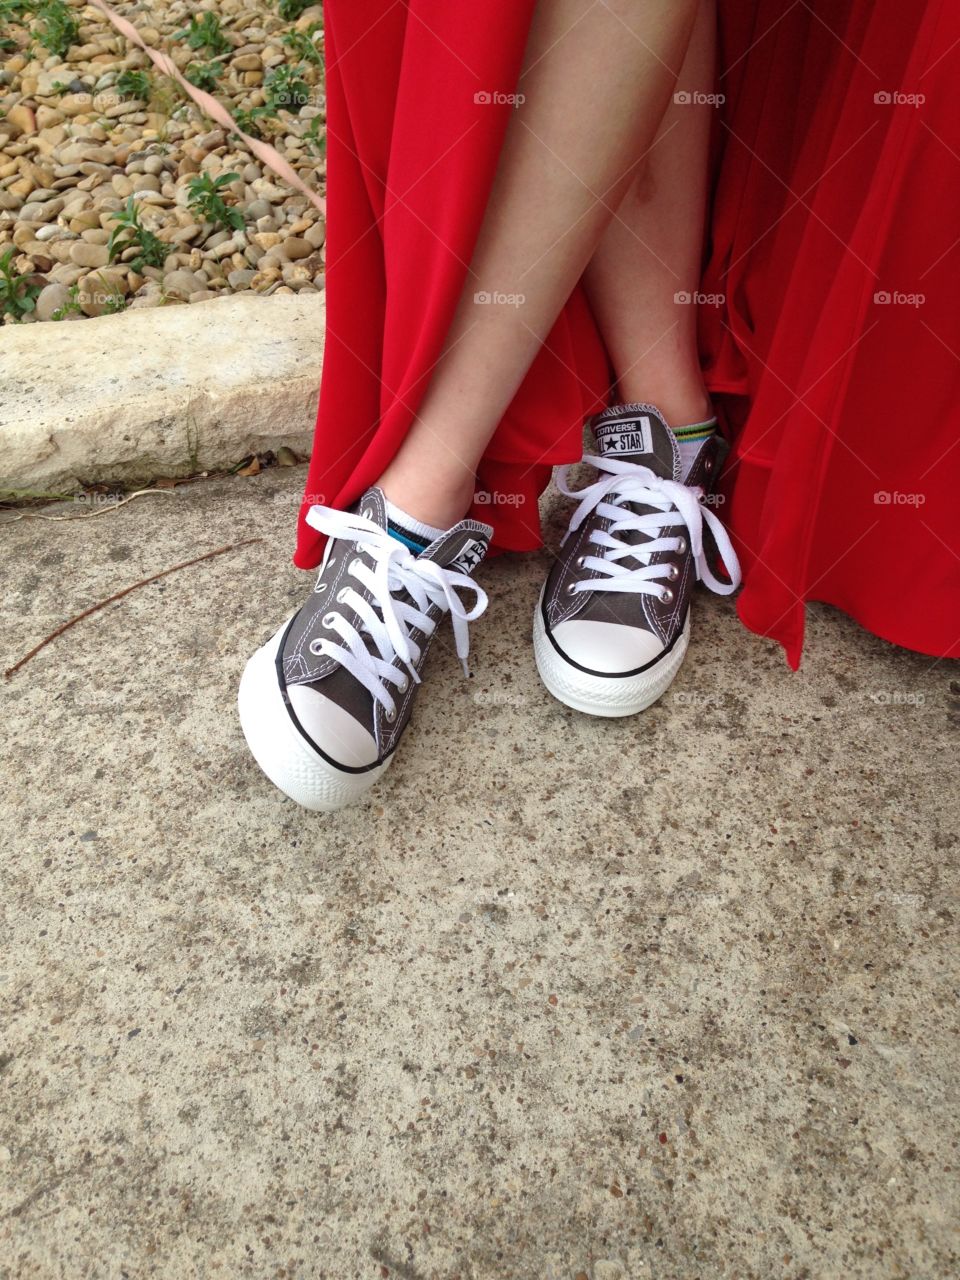 Prom shoes. Girl never leaves without her converse.